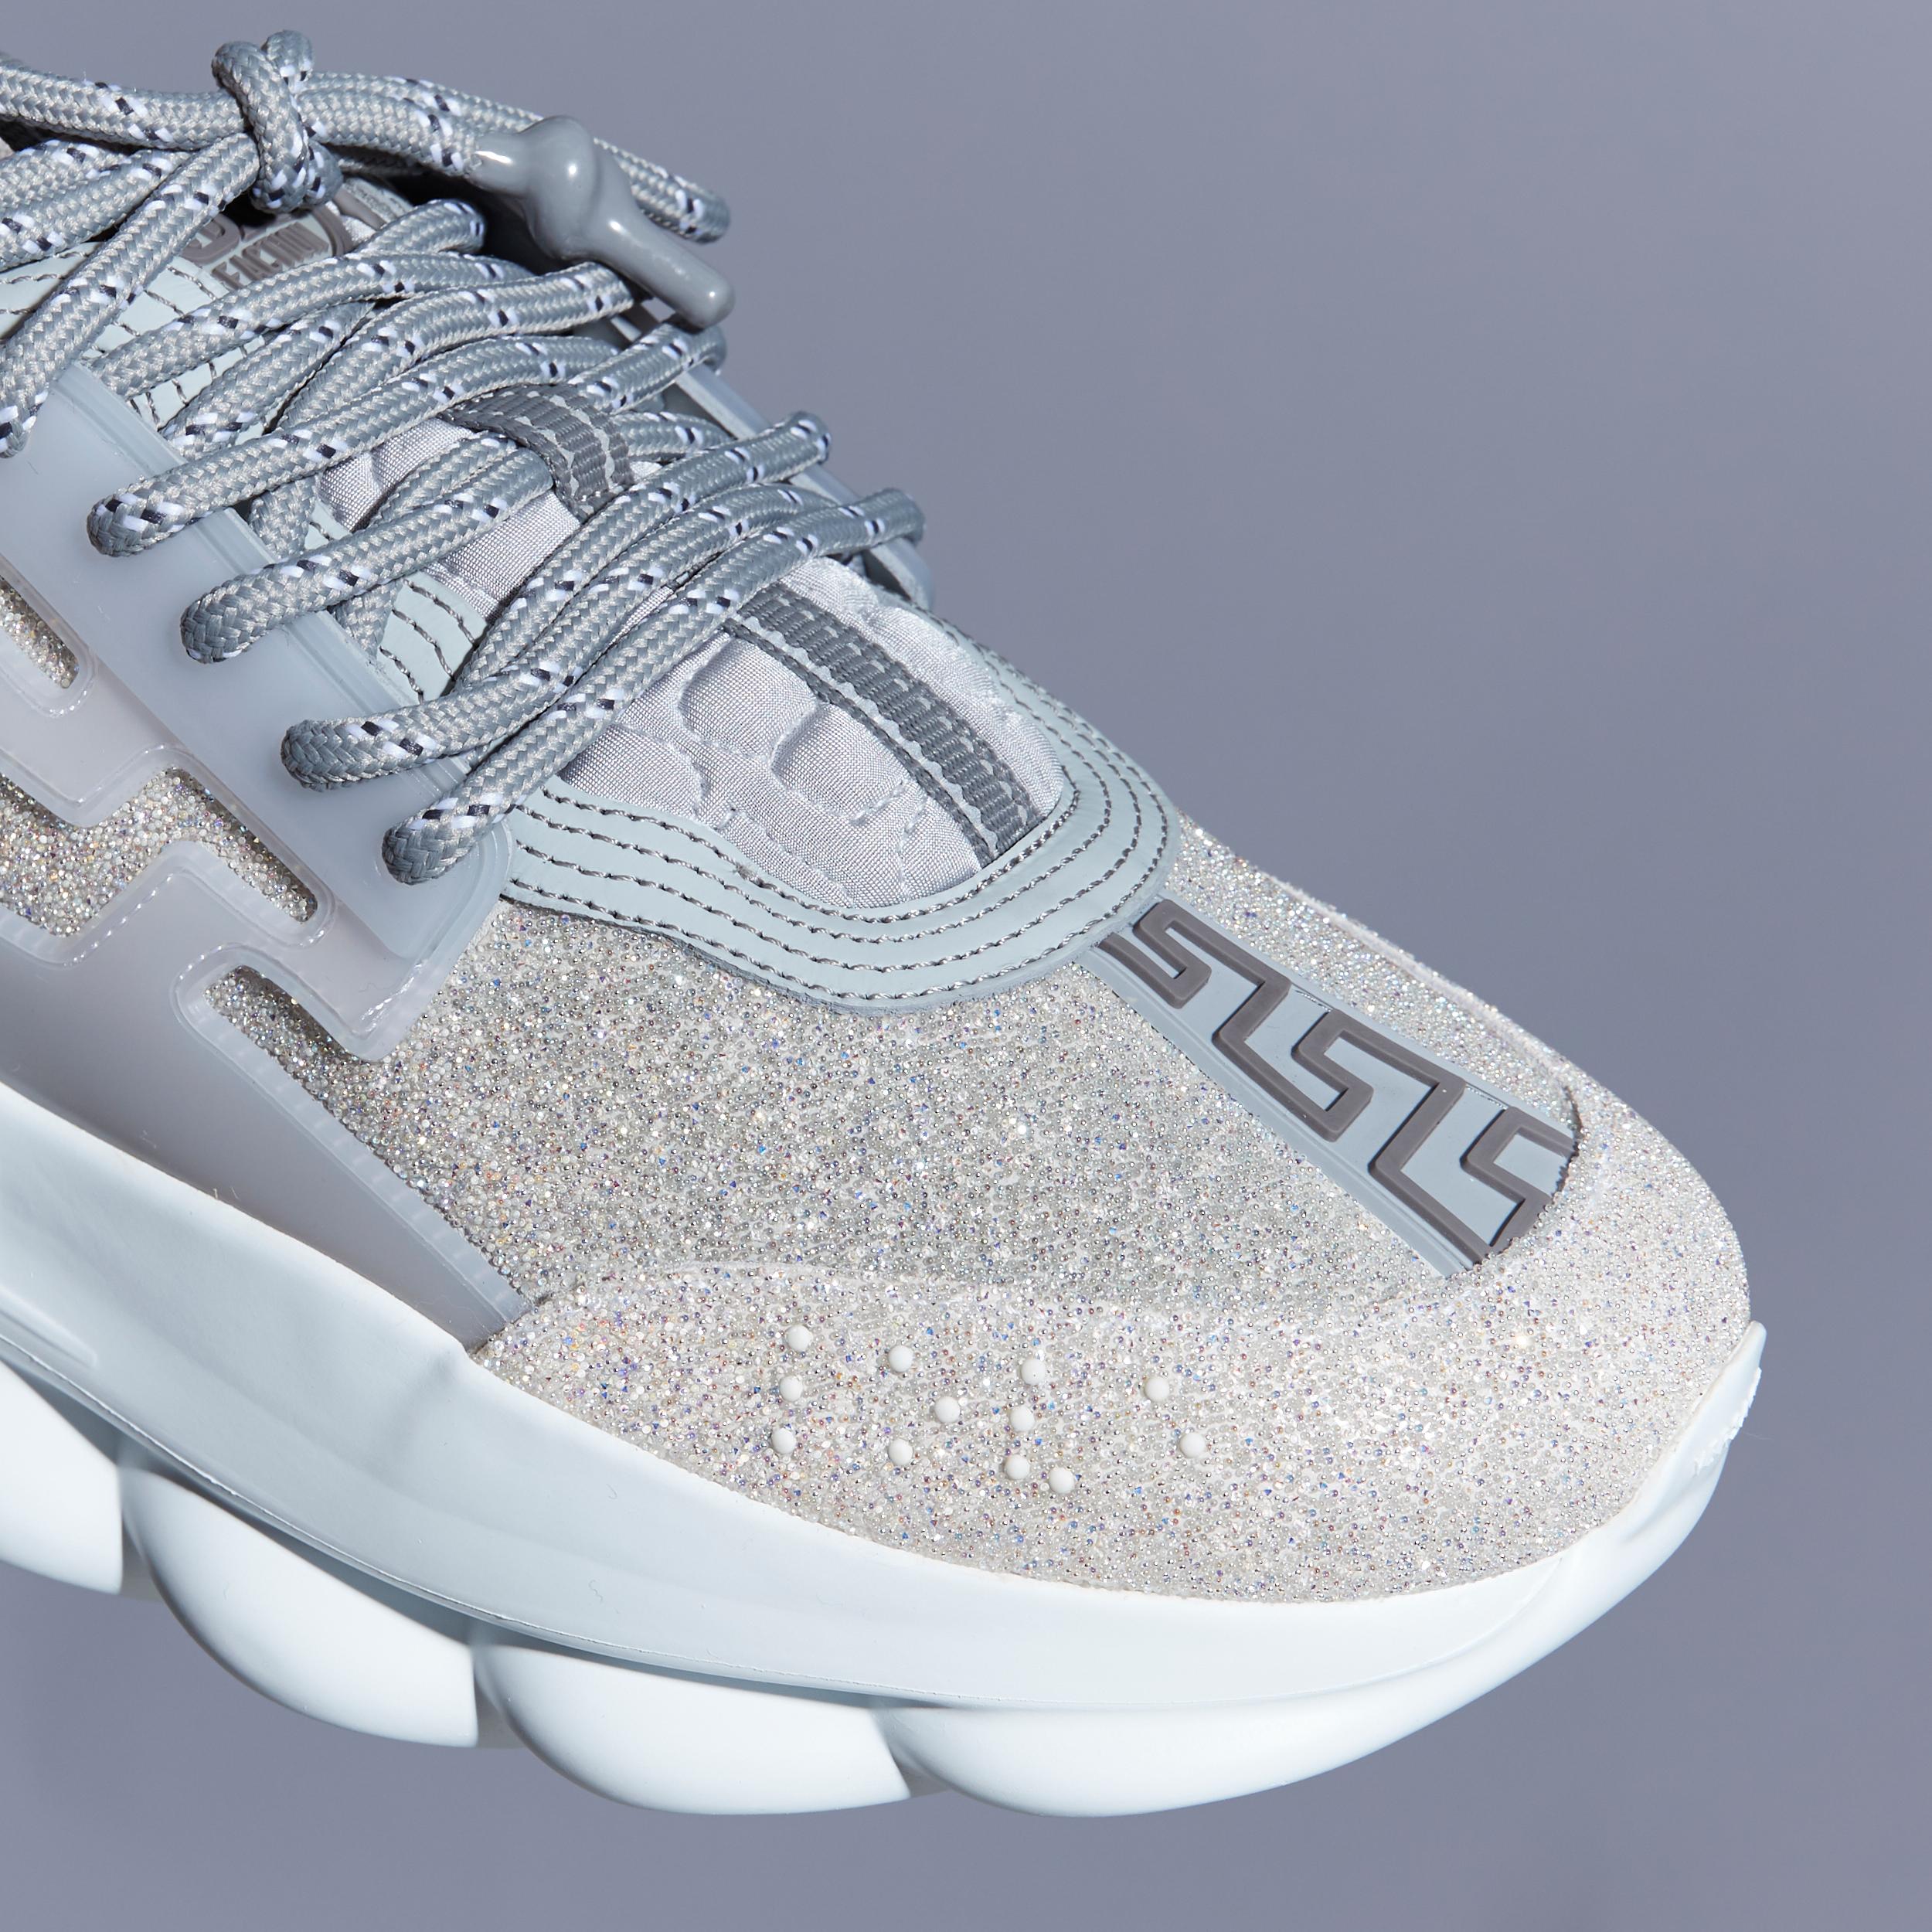 new VERSACE Chain Reaction Reflective Silver Crystal Rhinestone sneaker EU38 US5 For Sale 3